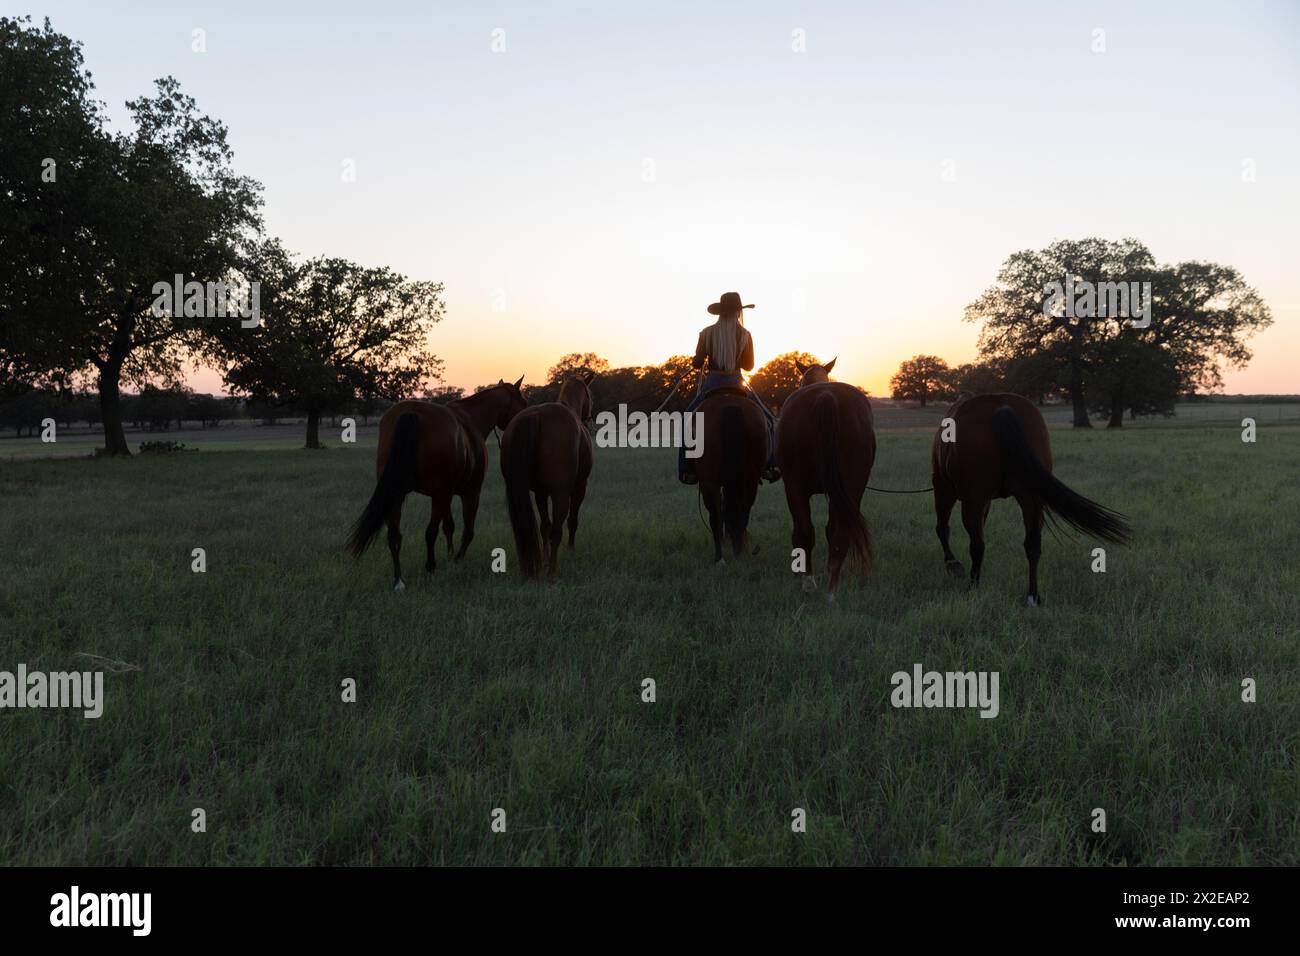 Girl on Horse Leading Horses into Sunset in Field of Green Grass Stock Photo